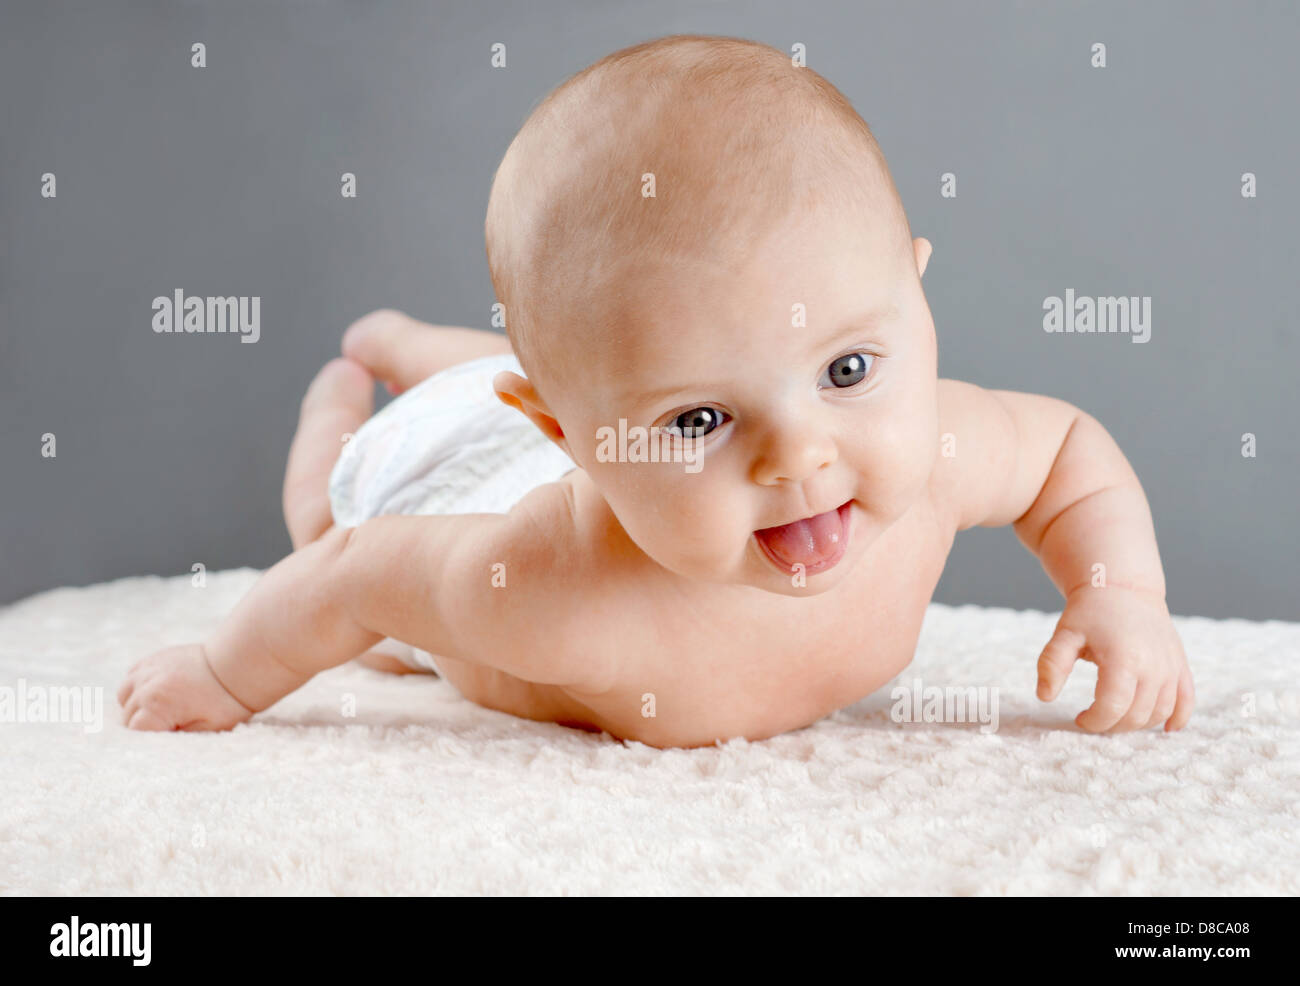 Baby on its belly, lifting its head trying to roll Stock Photo